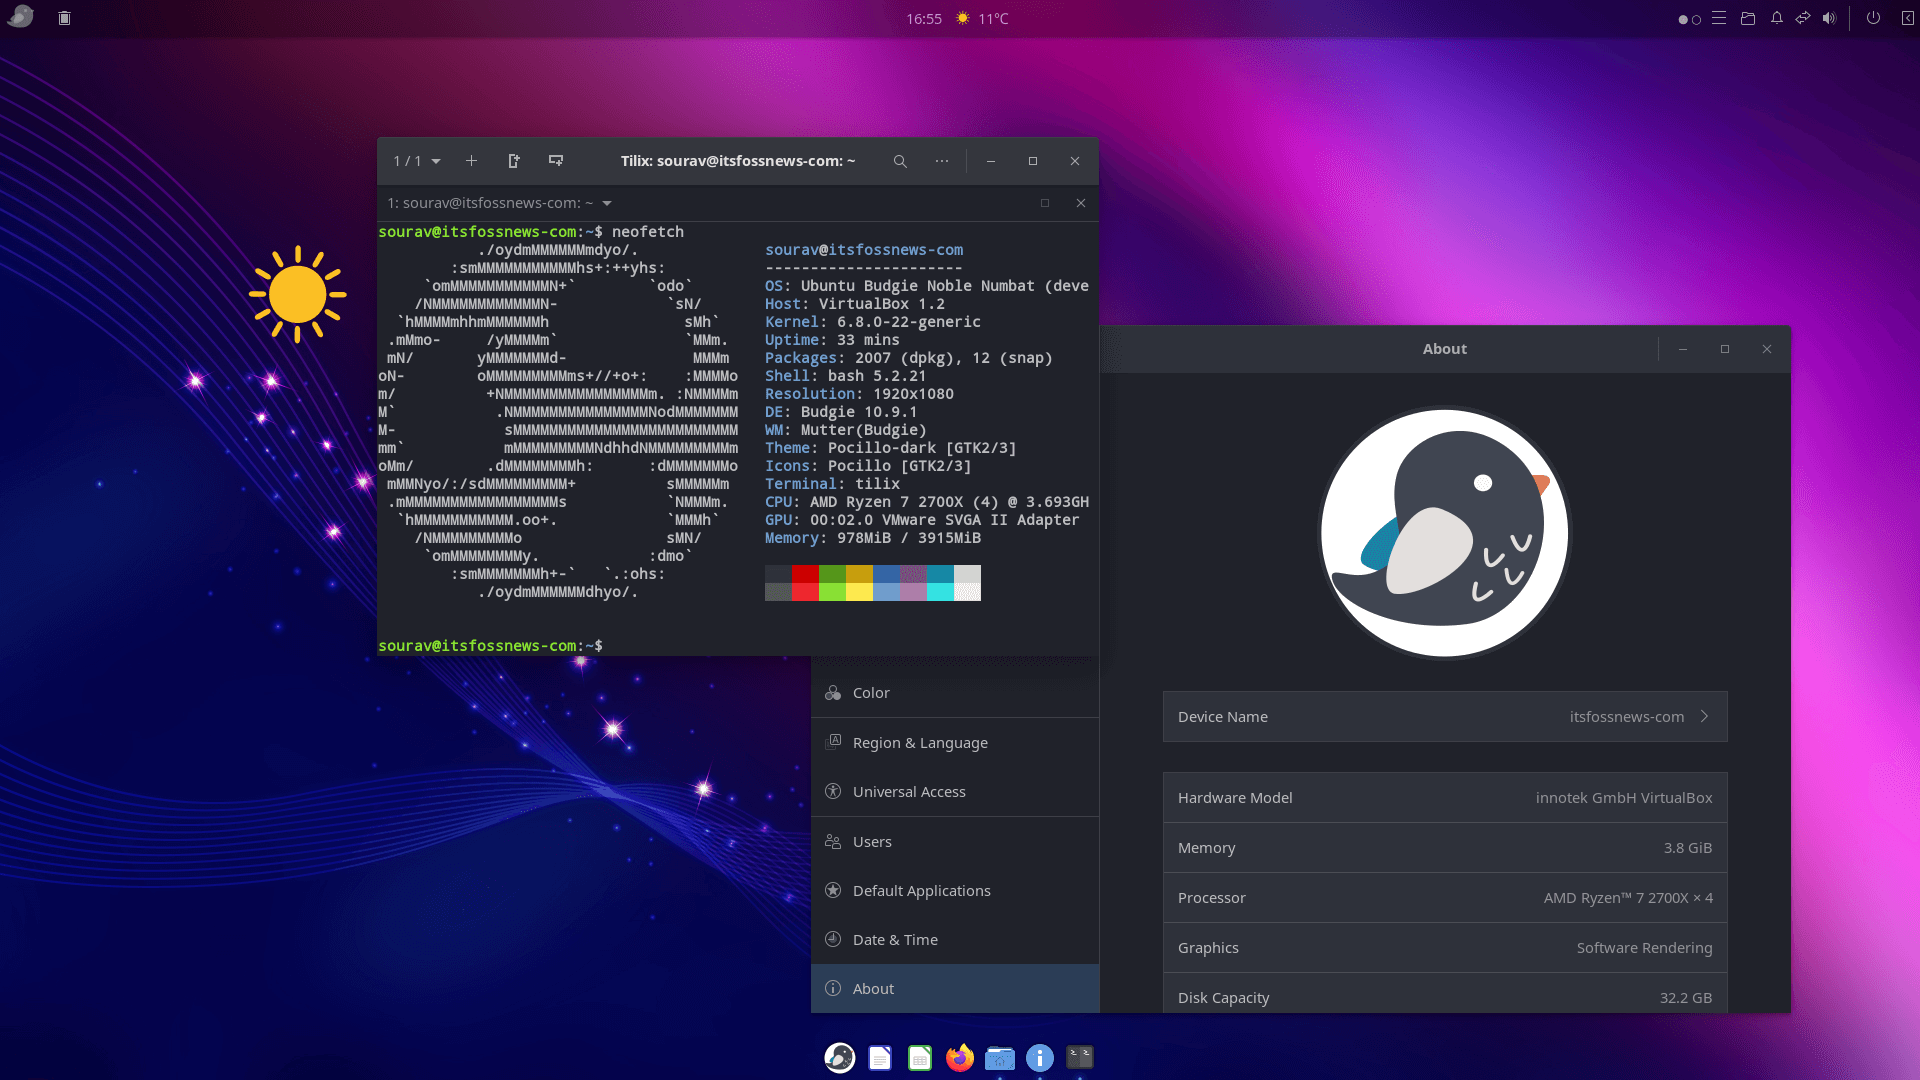 a screenshot of ubuntu budgie 24.04 lts neofetch output and about info